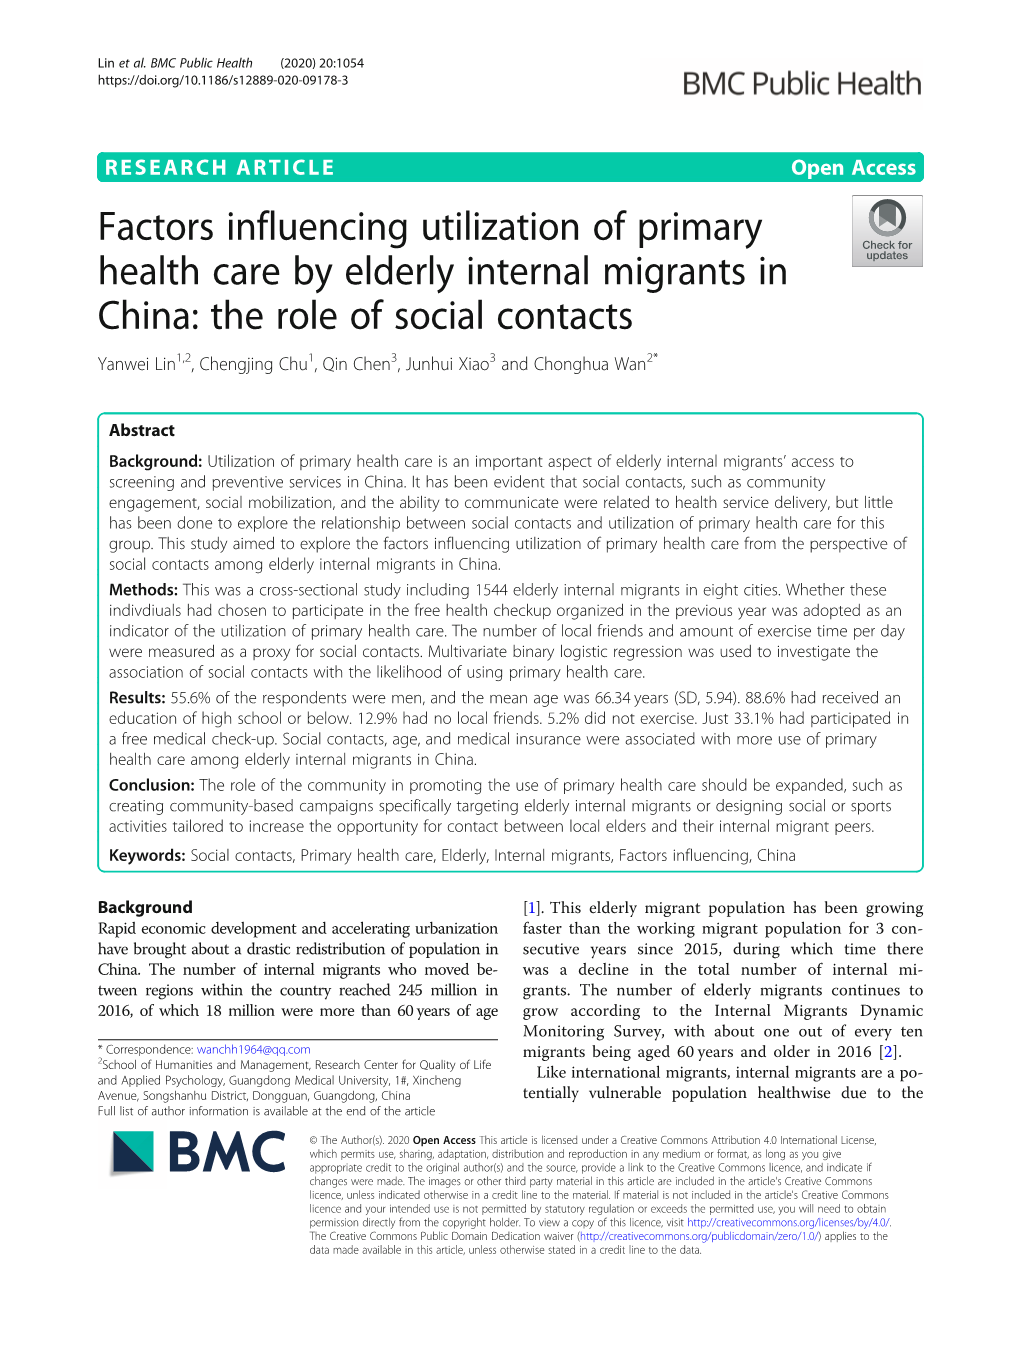 Factors Influencing Utilization of Primary Health Care by Elderly